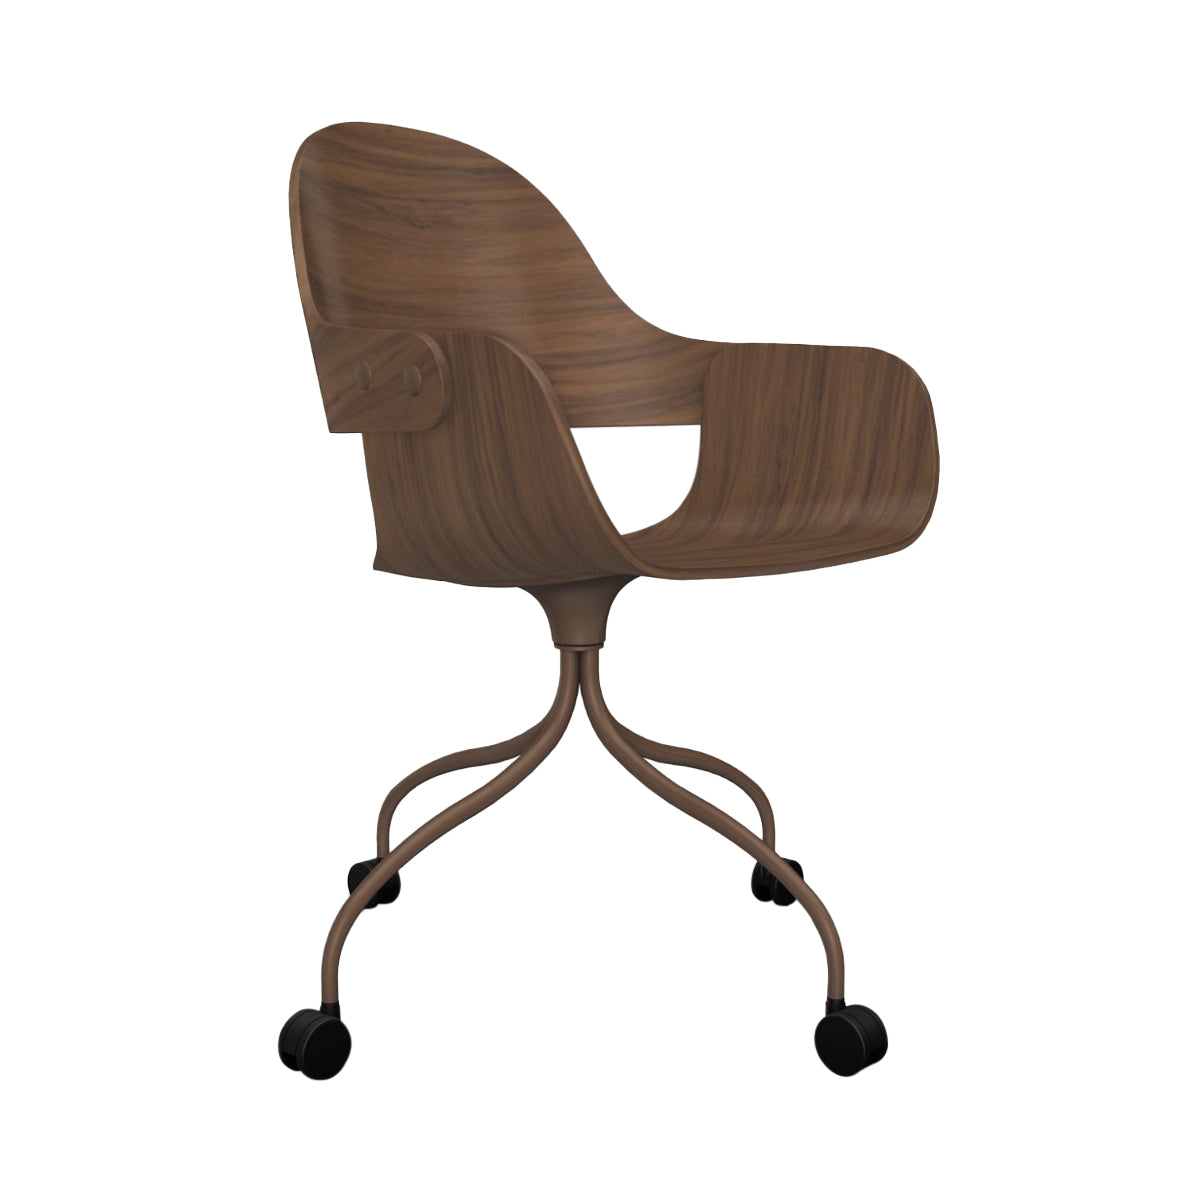 Showtime Nude Chair with Wheel: Walnut + Pale Brown